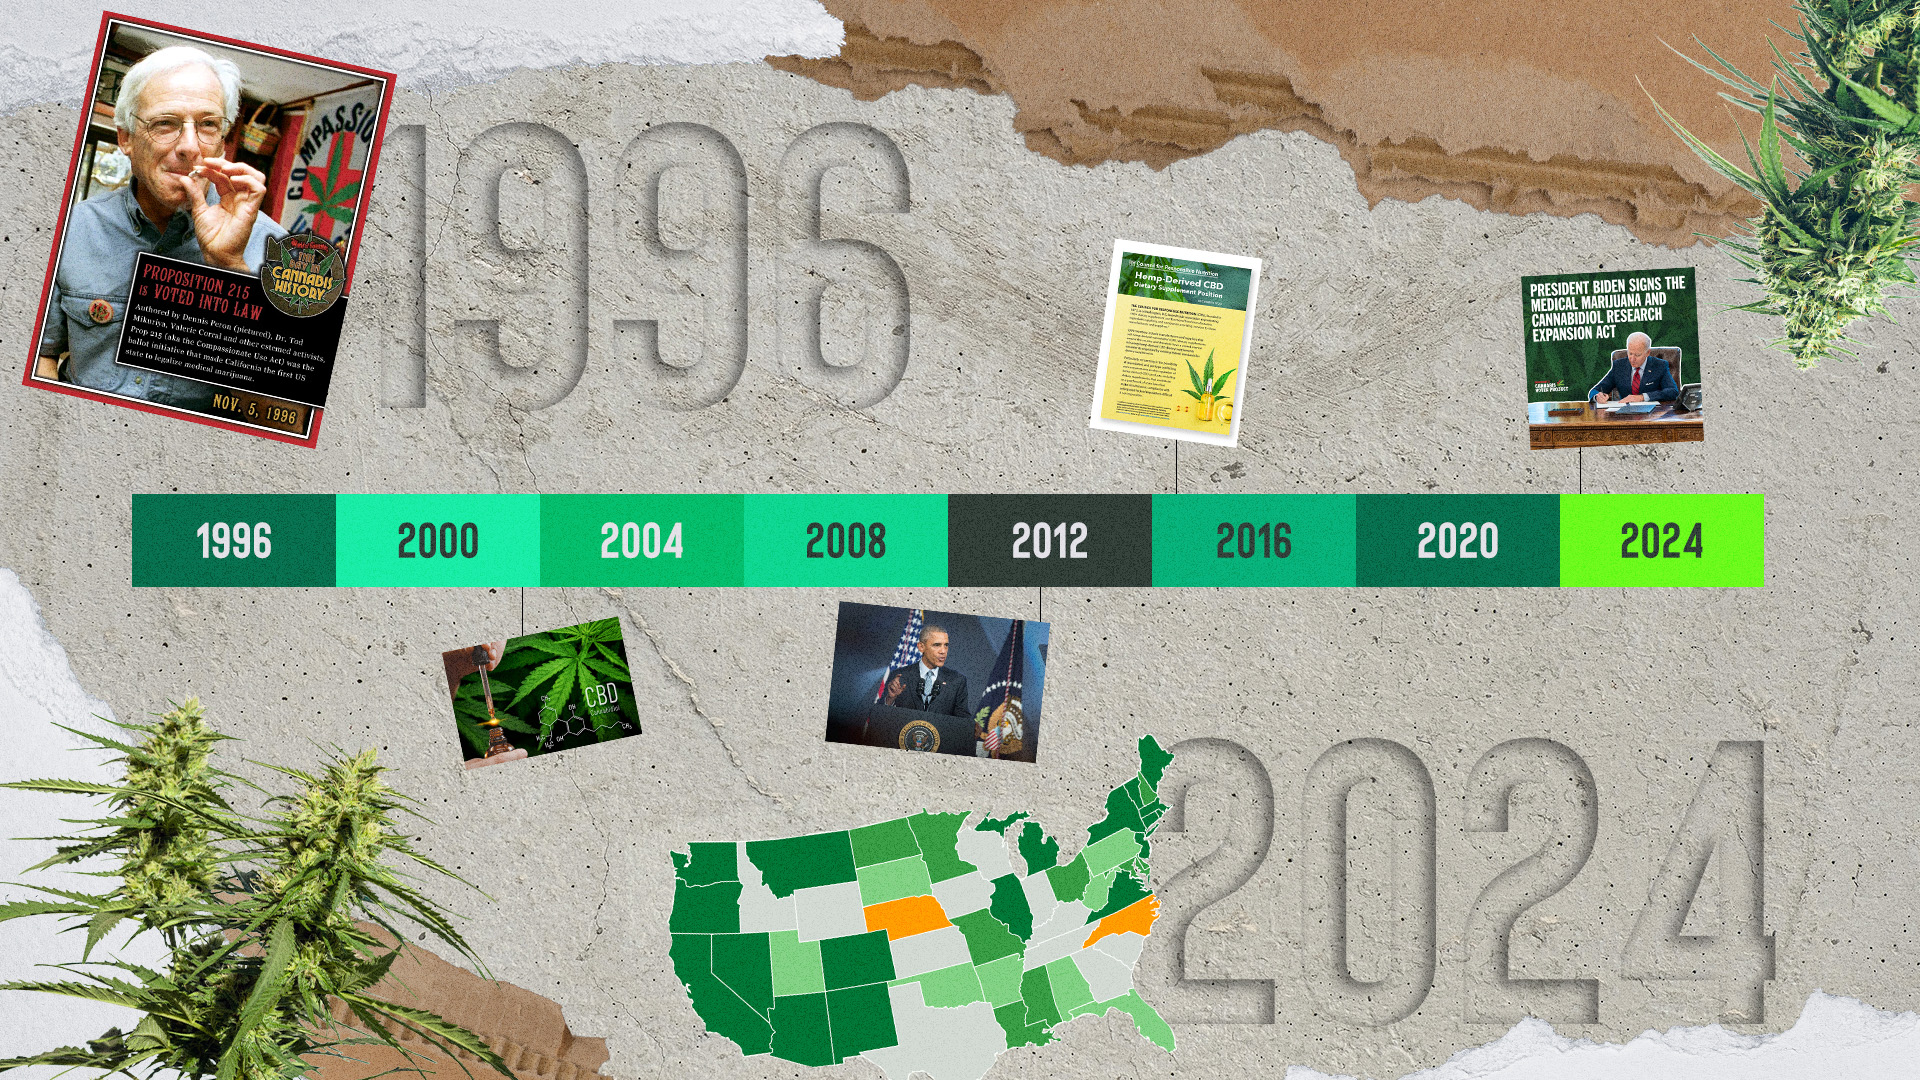 From 1996 to 2024: How Has Medical Cannabis Changed?